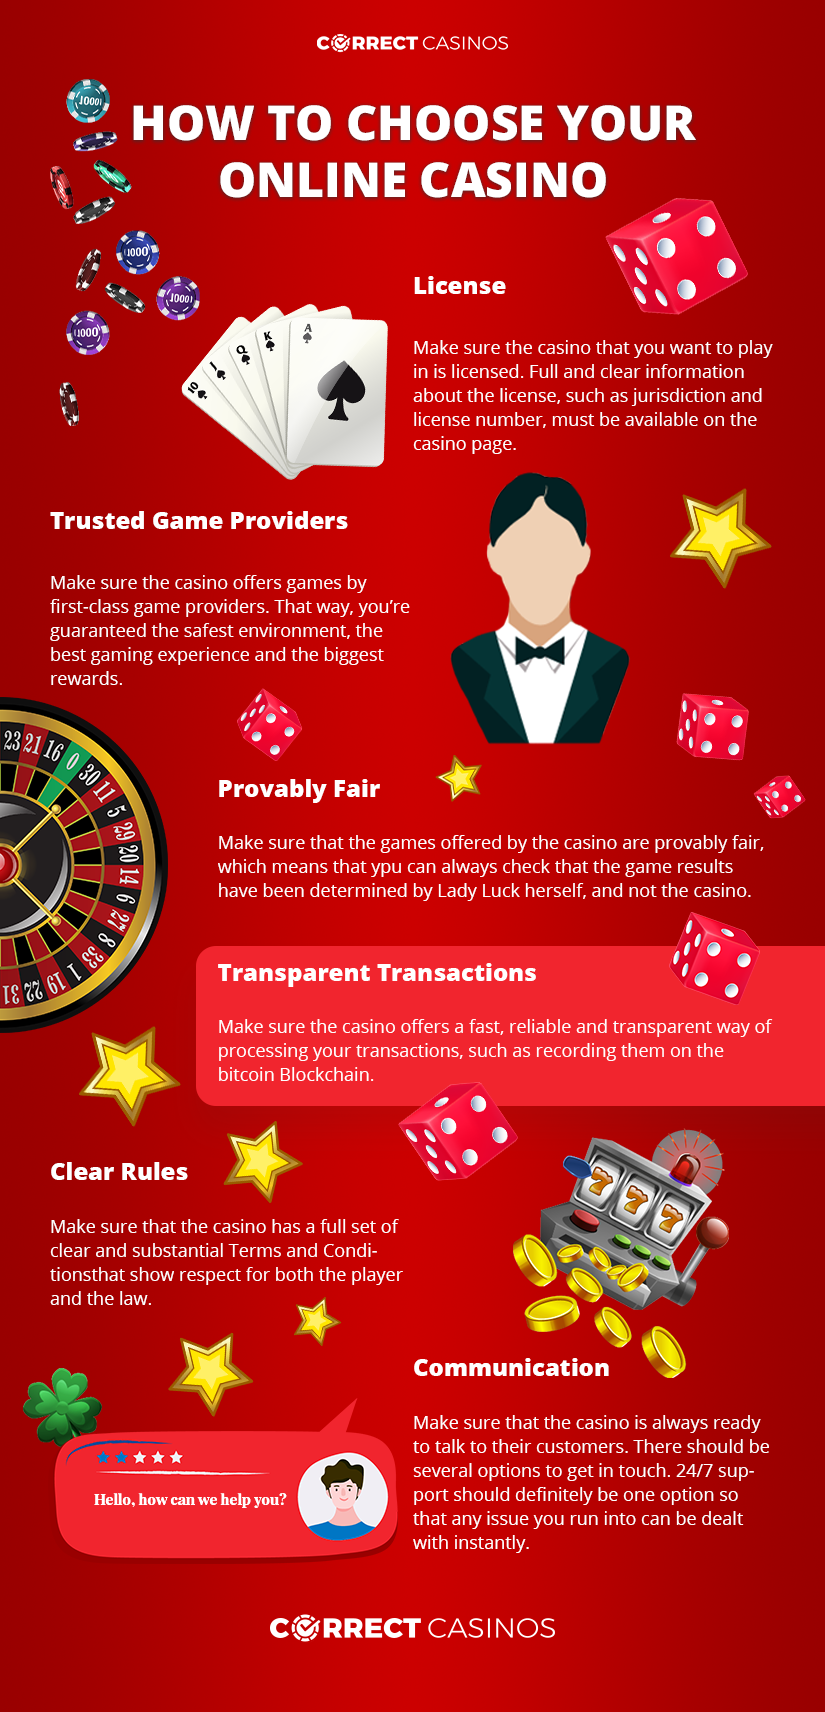 How to choose the right online casino